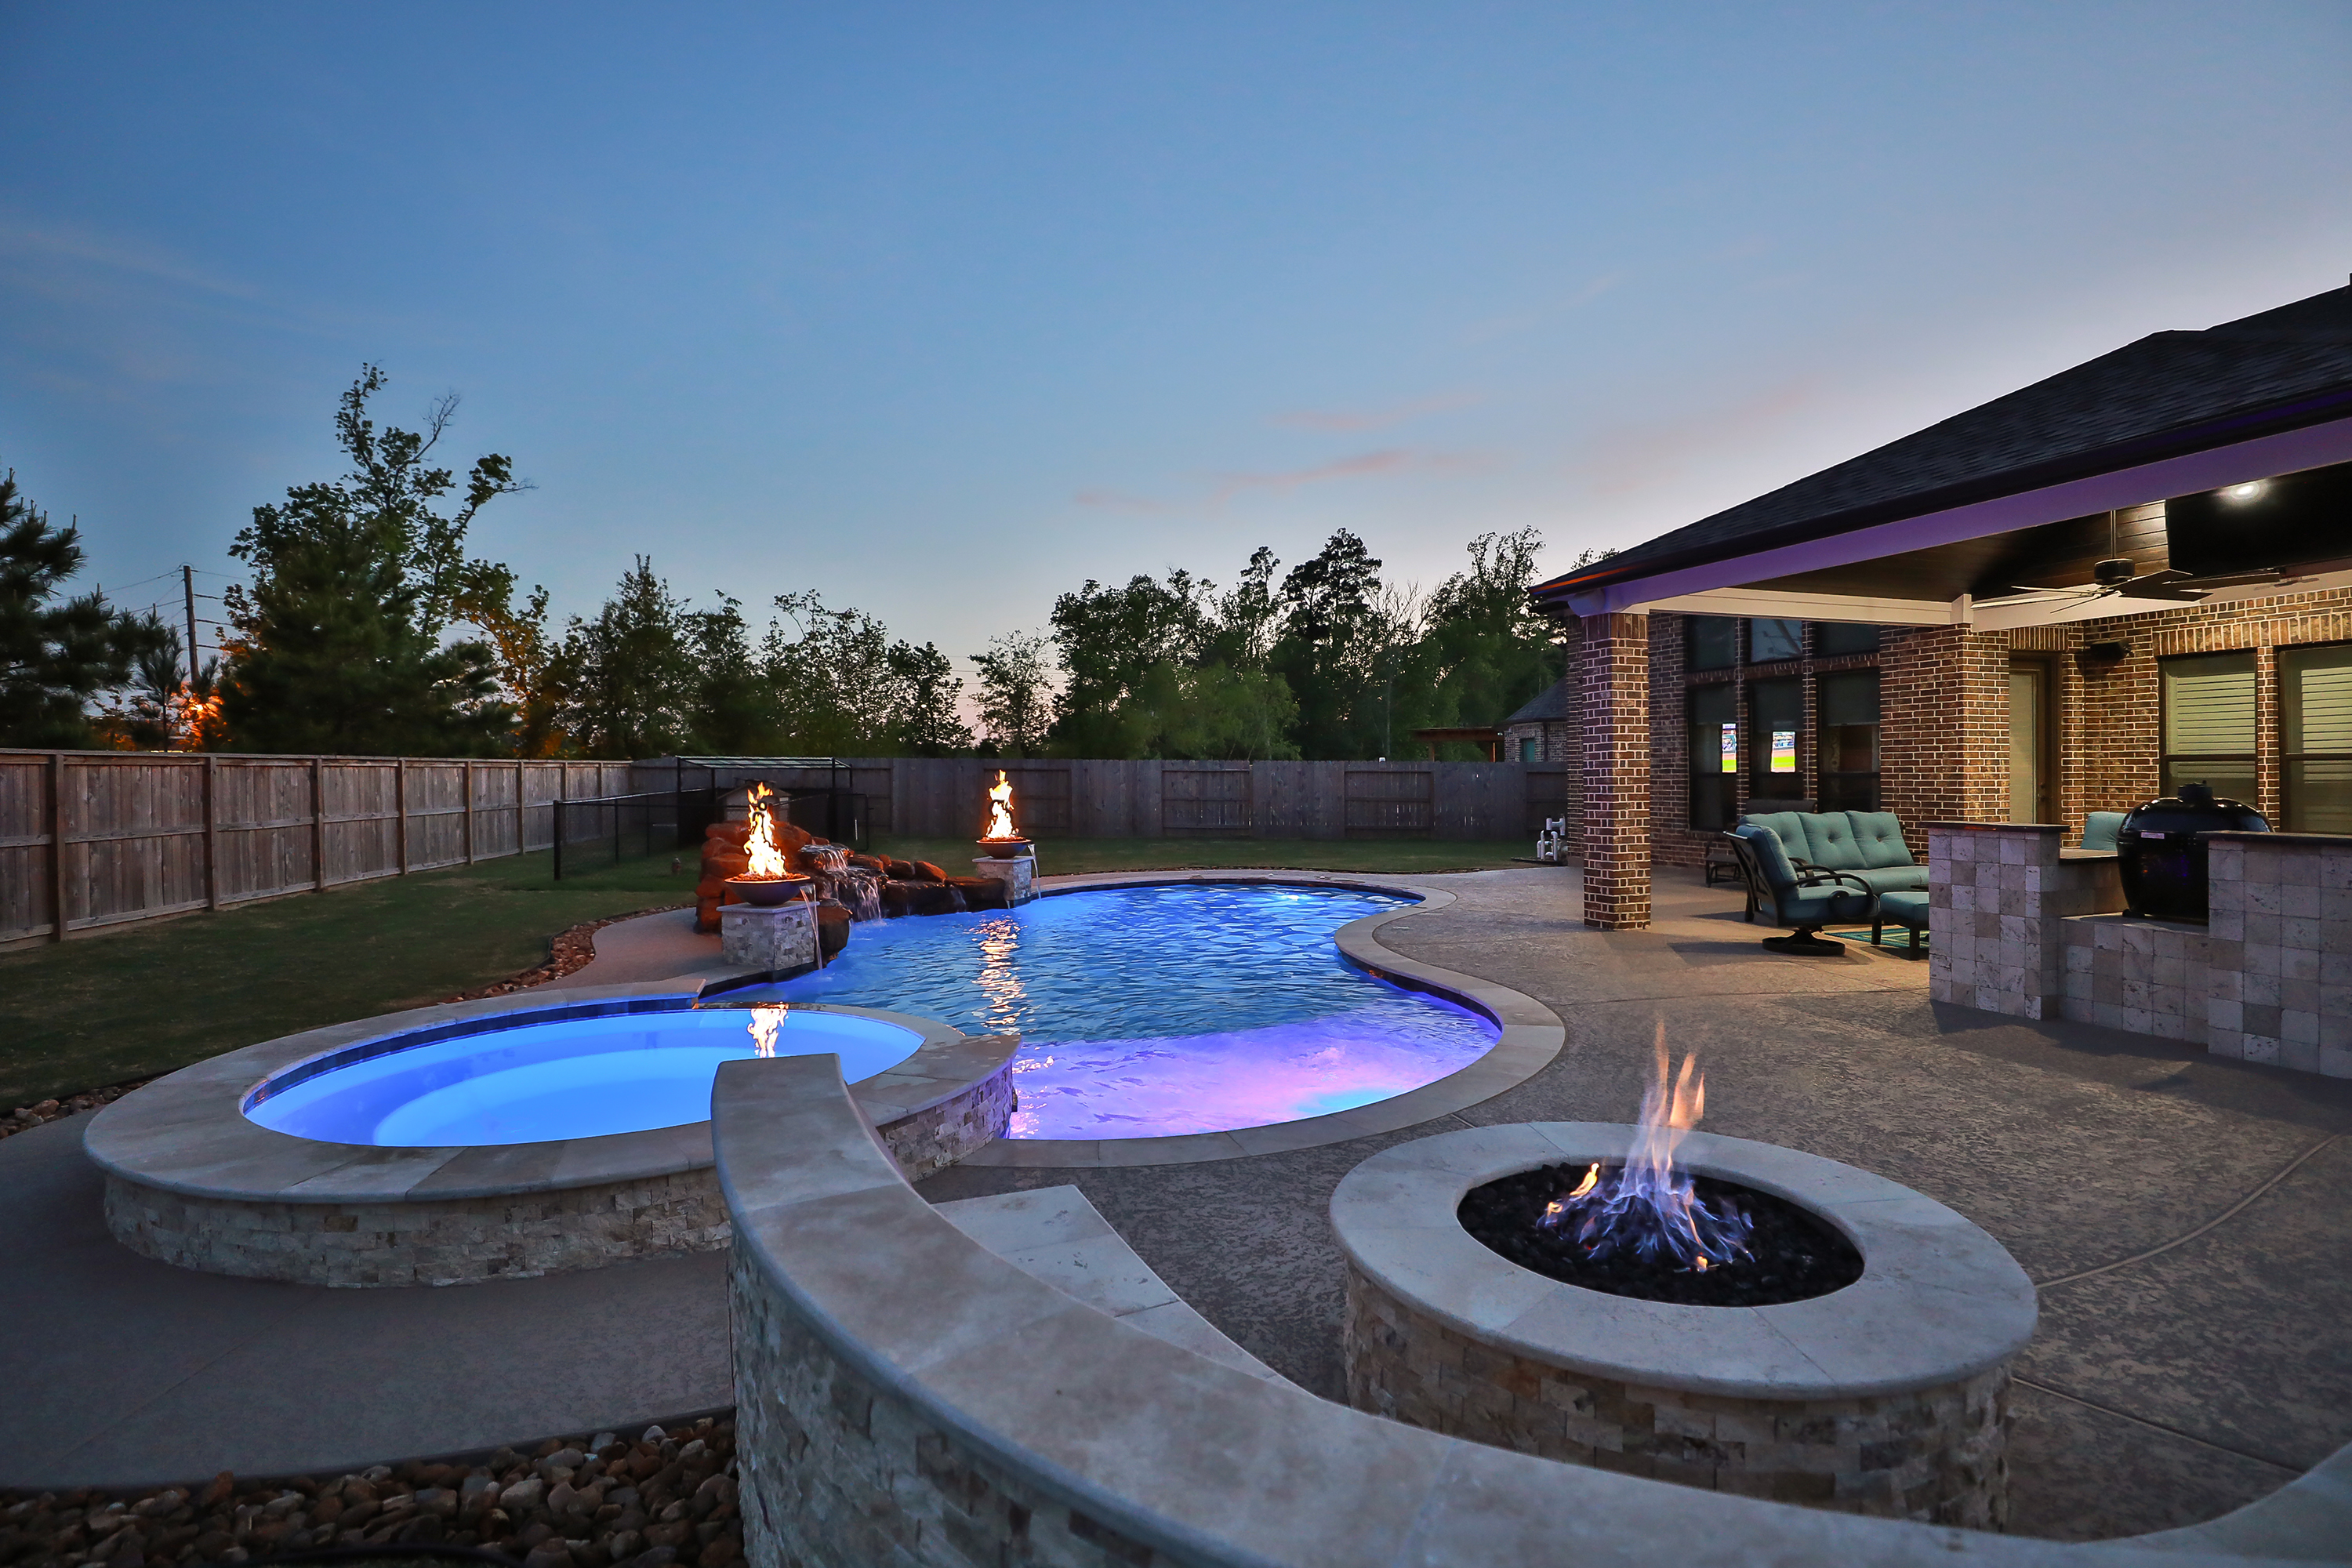 Fire Pit & Seating Area on Pool Deck | Artistry Outdoors | Artistry